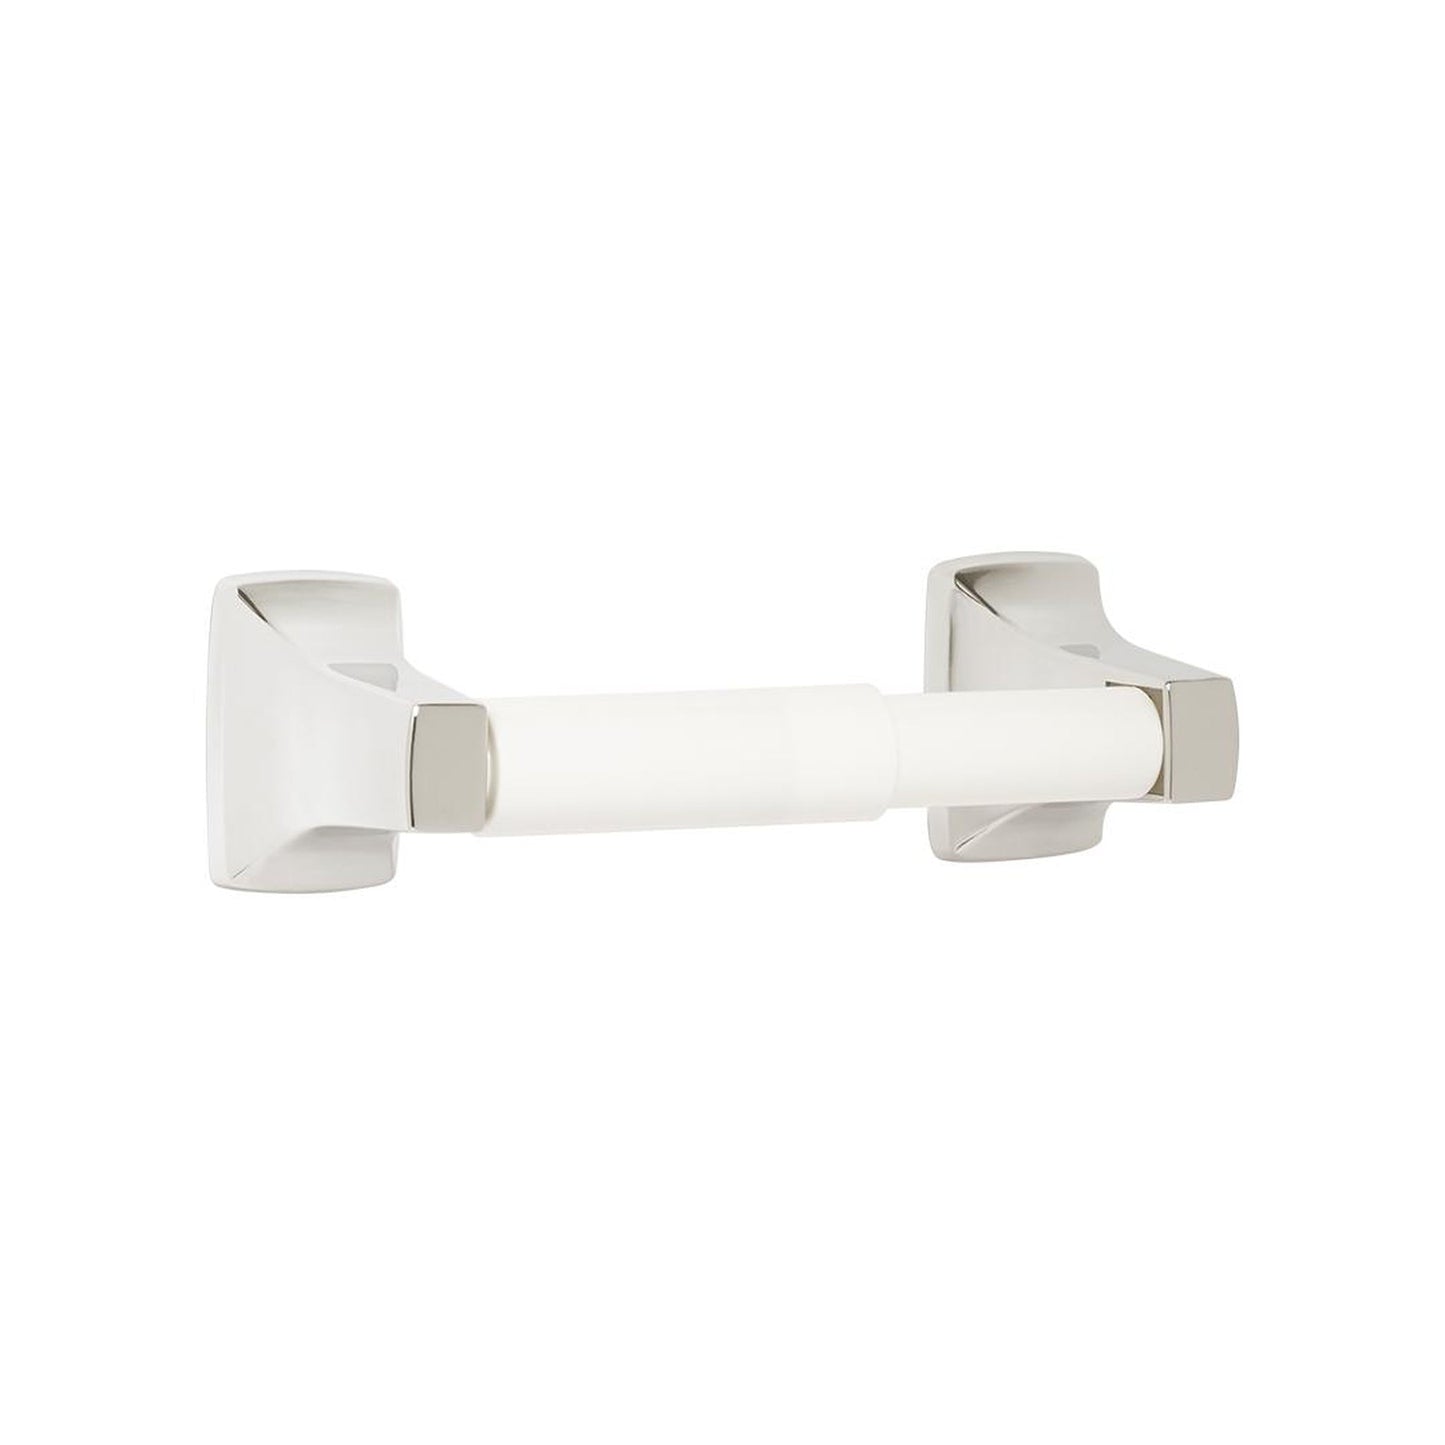 Seachrome Contemporary Series 7" x 3" Die Cast Zinc Alloy Single Toilet Paper Holder With Plastic Spring White Roller